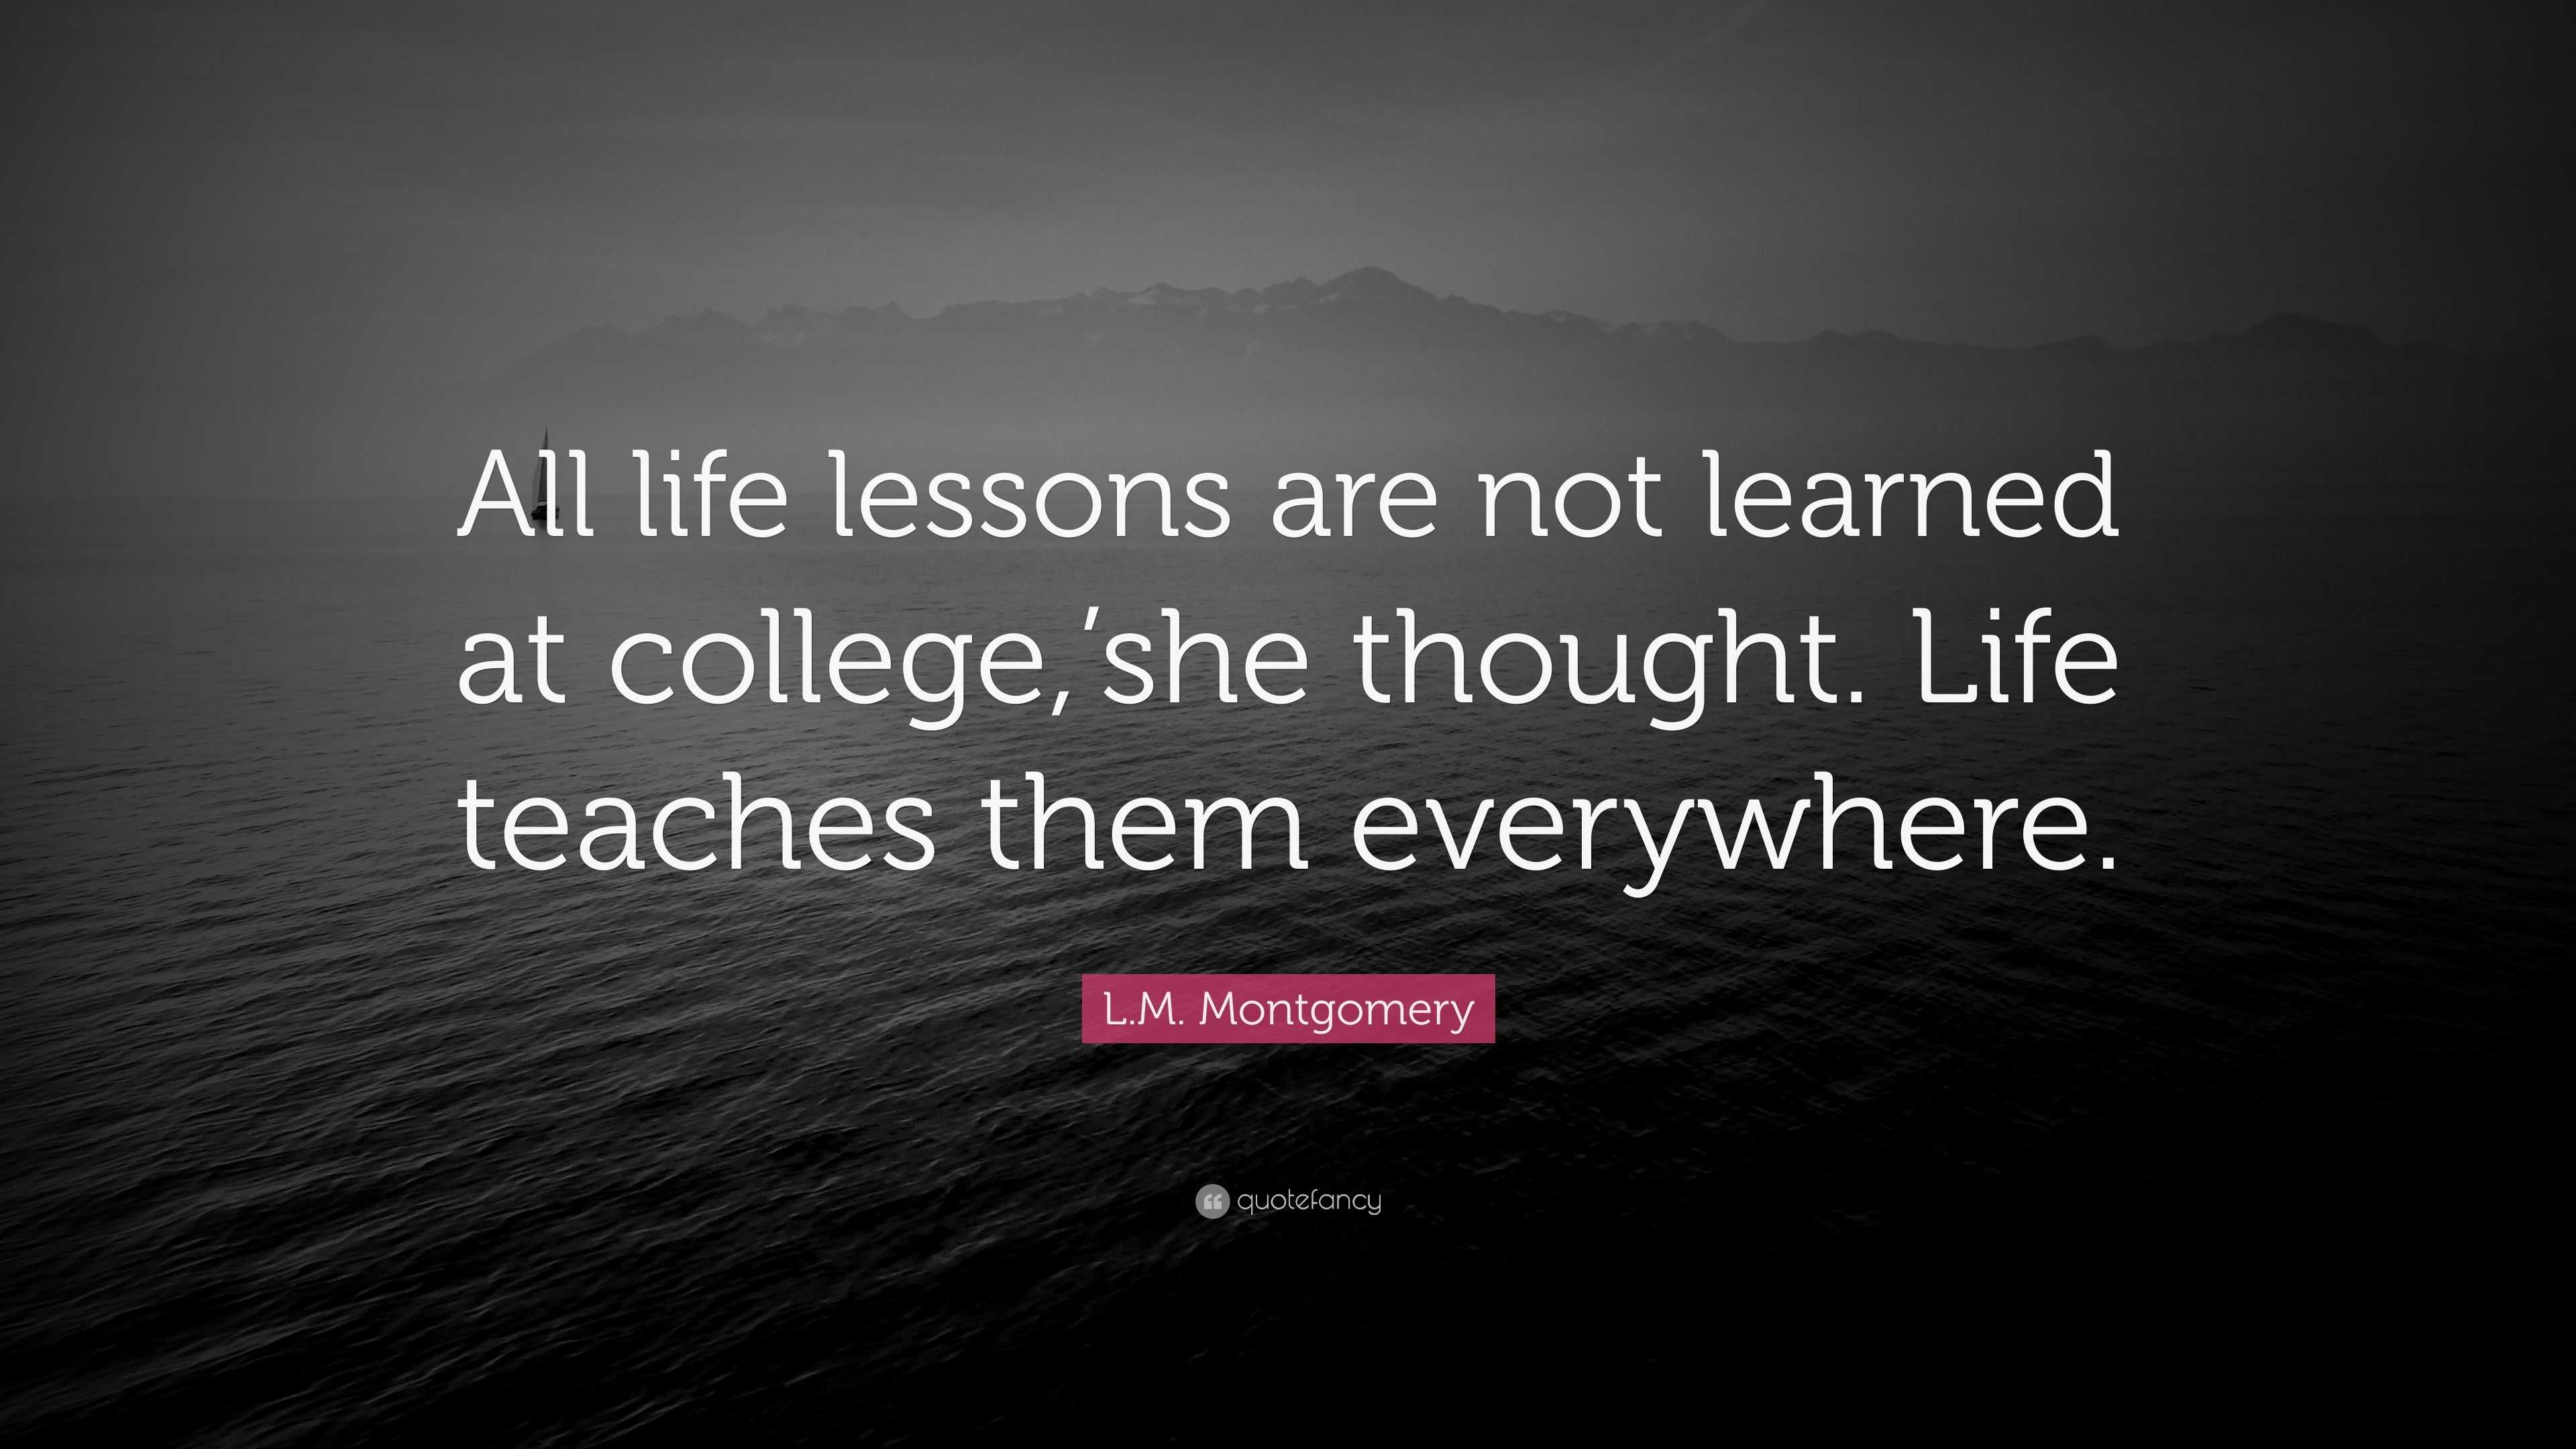 Lora's quotes - We are all constantly learning life's lessons, and